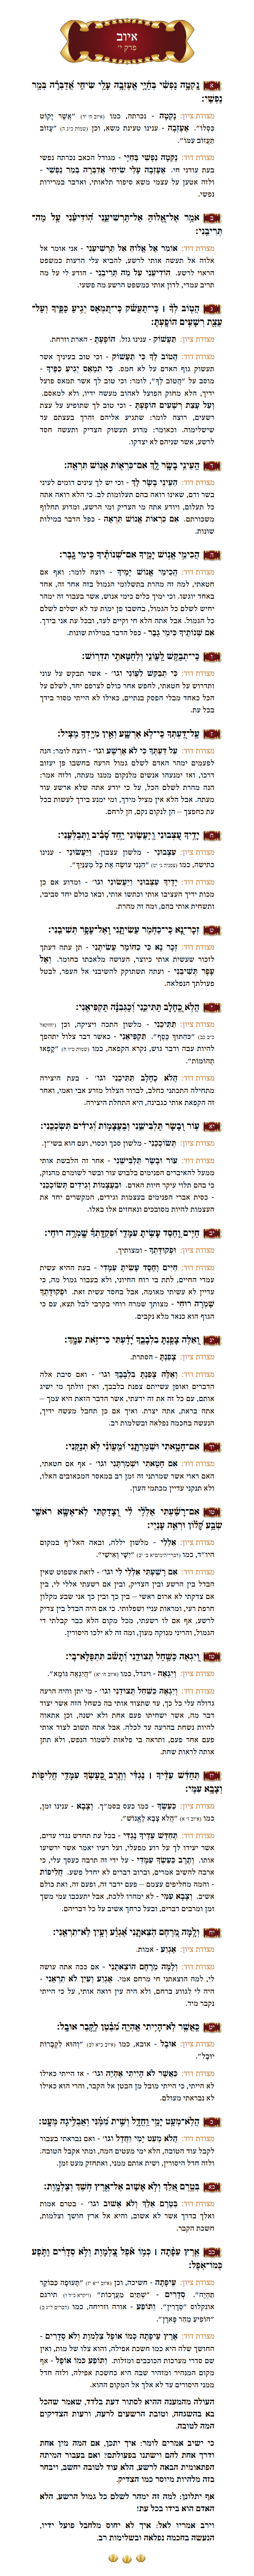 Sefer Iyov Chapter 10 with commentary